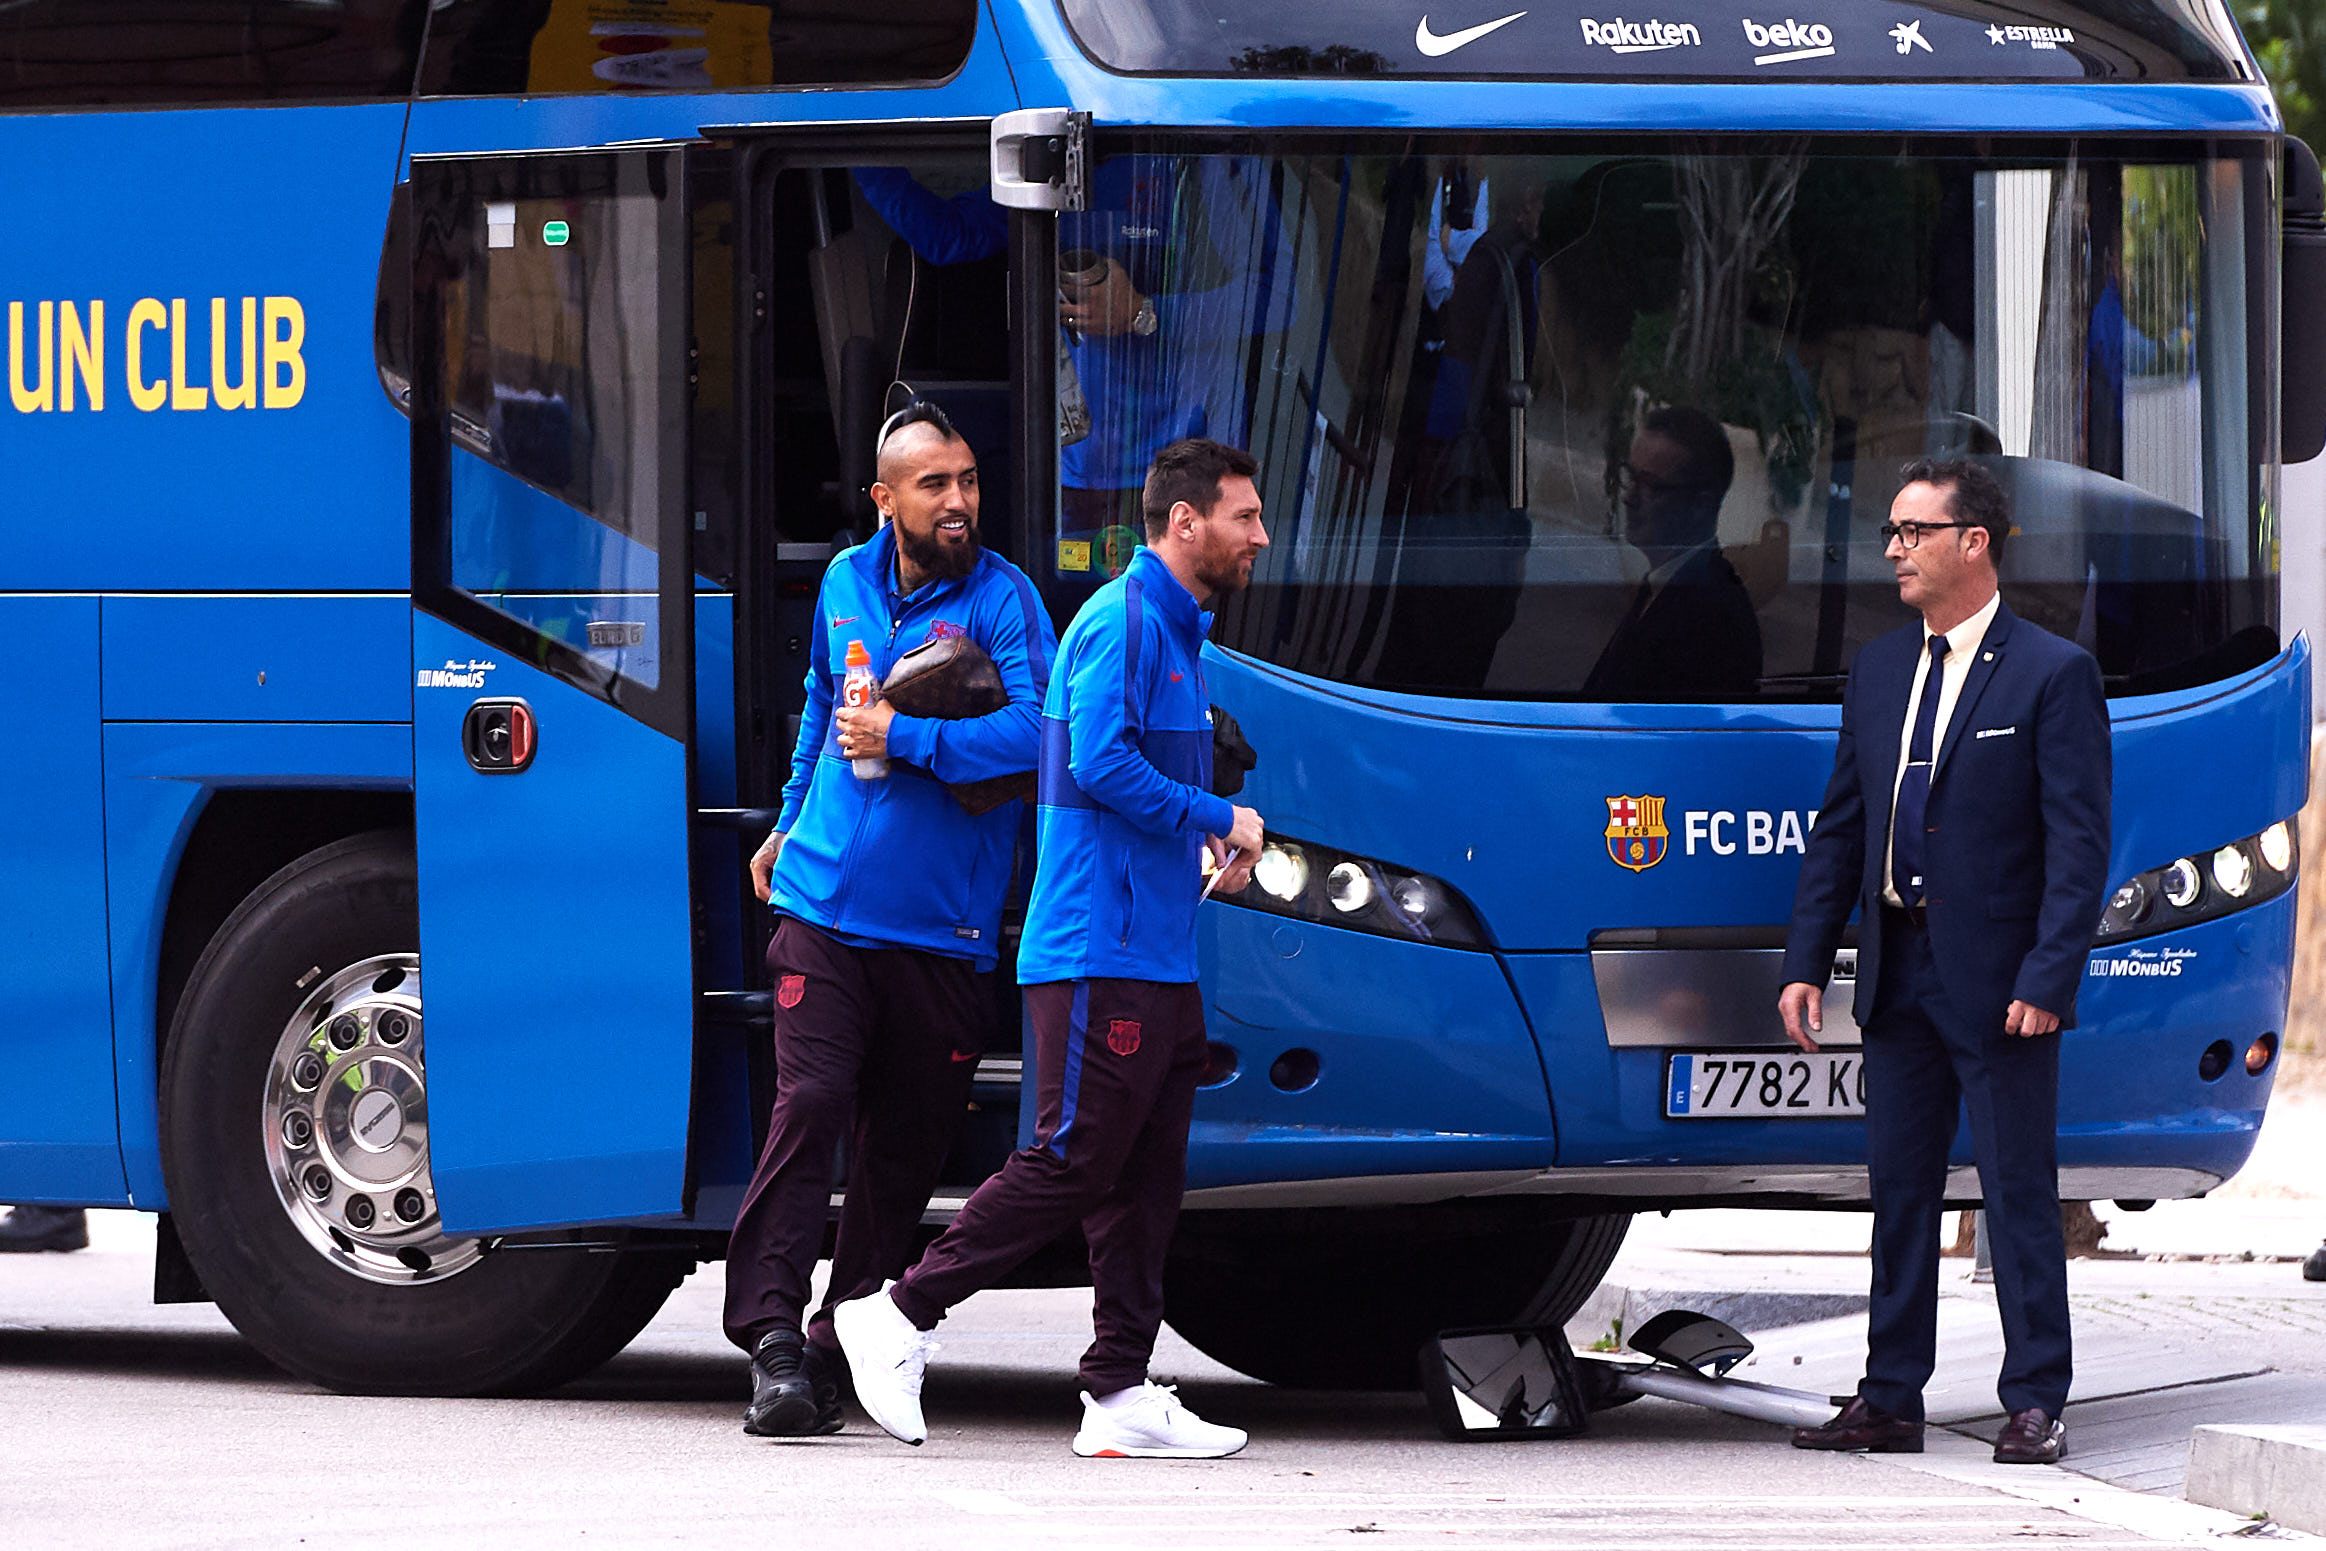 BARCELONA, SPAIN - DECEMBER 18: Arturo Vidal and Lionel Messi of FC Barcelona arrive at Hotel Sofia with the team bus ahead of the Liga match between FC Barcelona and Real Madrid CF near Camp Nou on December 18, 2019 in Barcelona, Spain. (Photo by Alex Caparros/Getty Images)